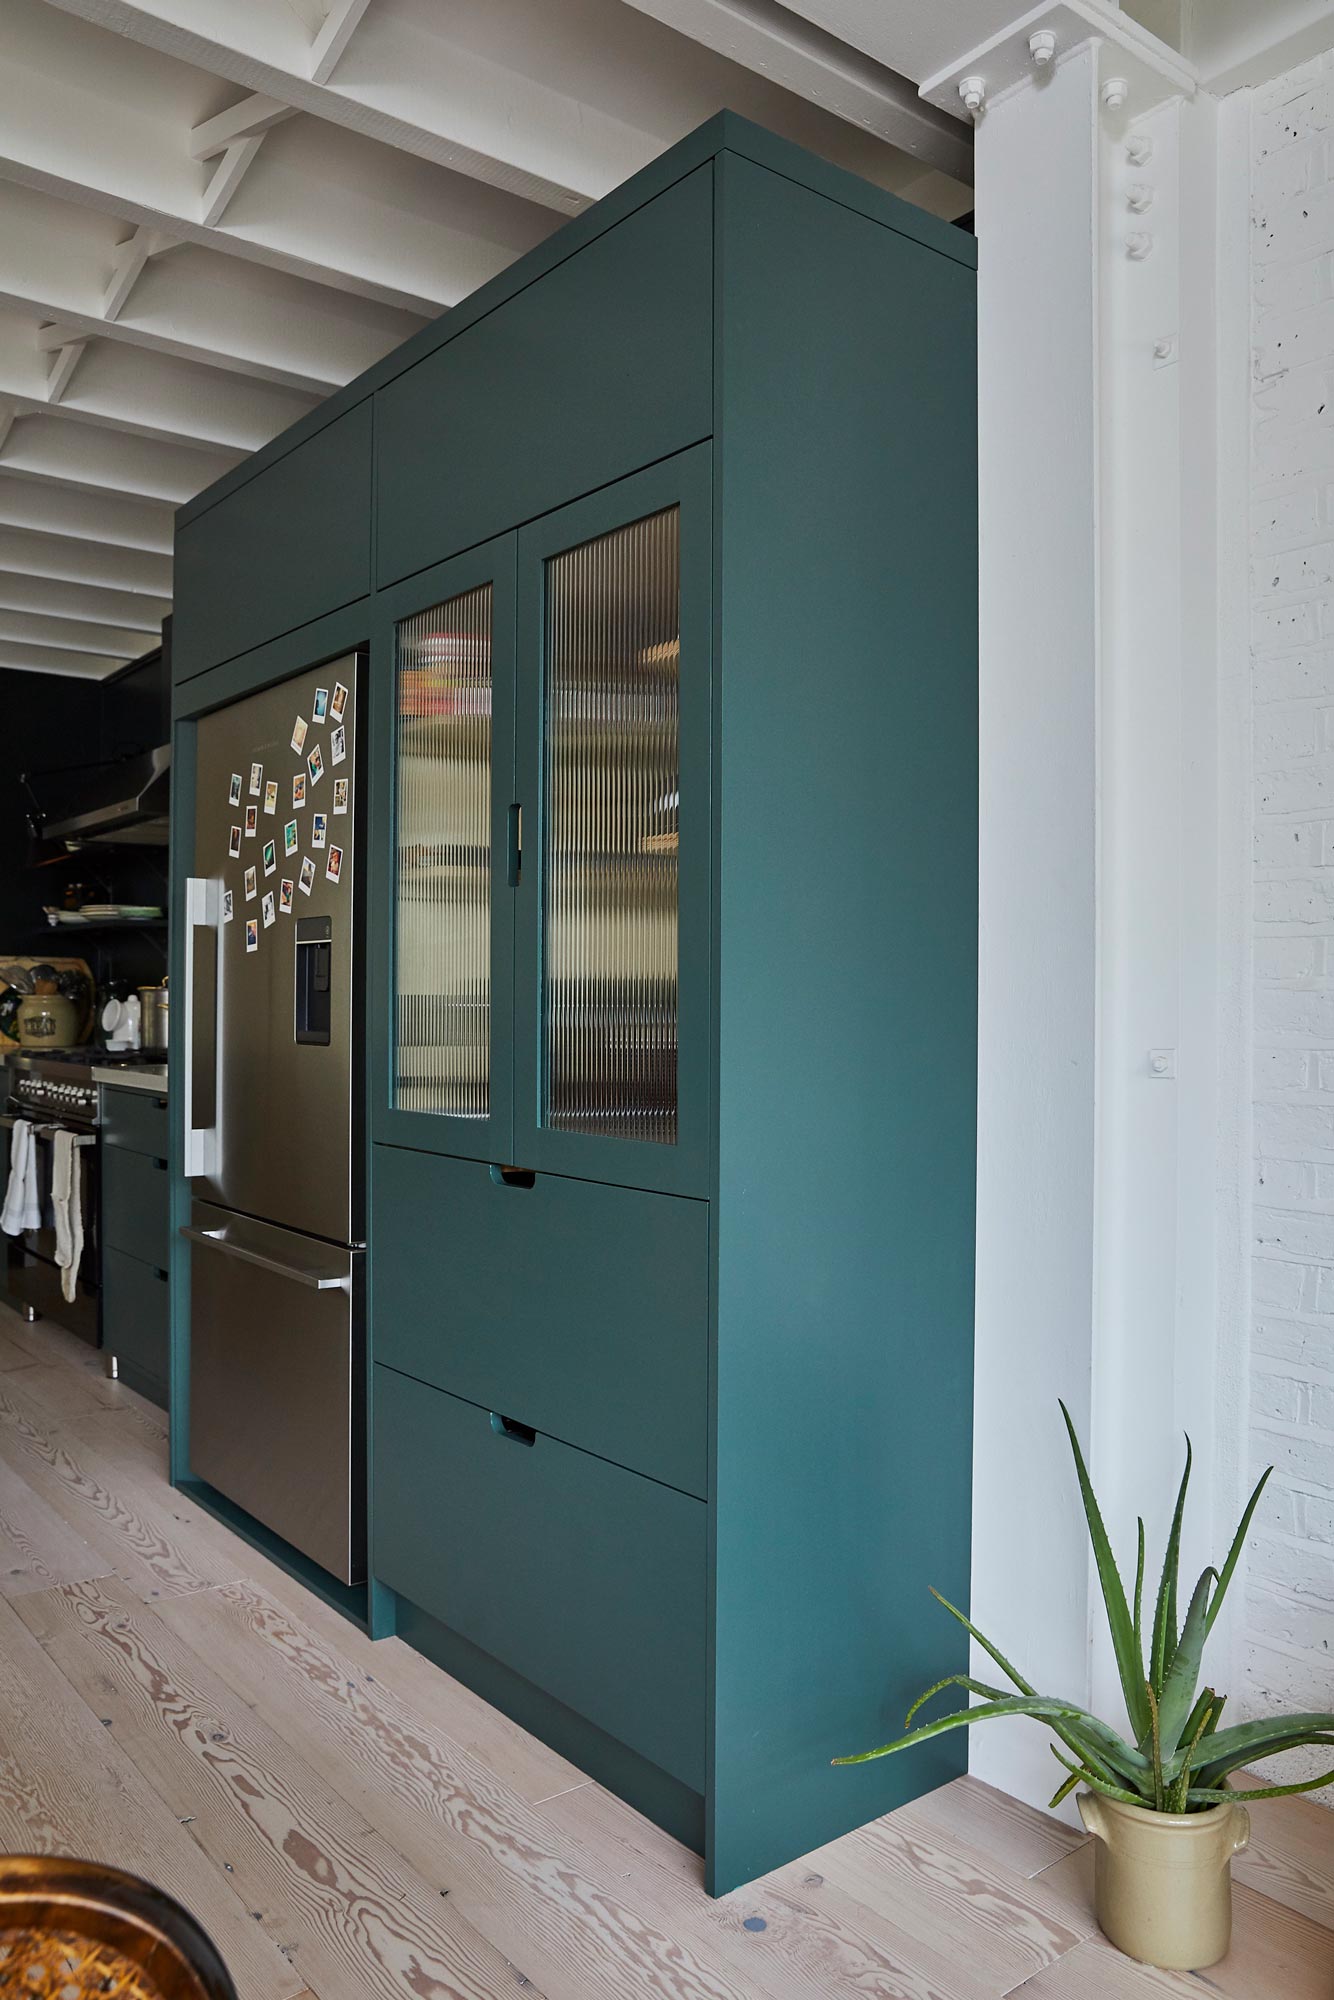 Green painted pantry unit next to stainless steel fridge freezer